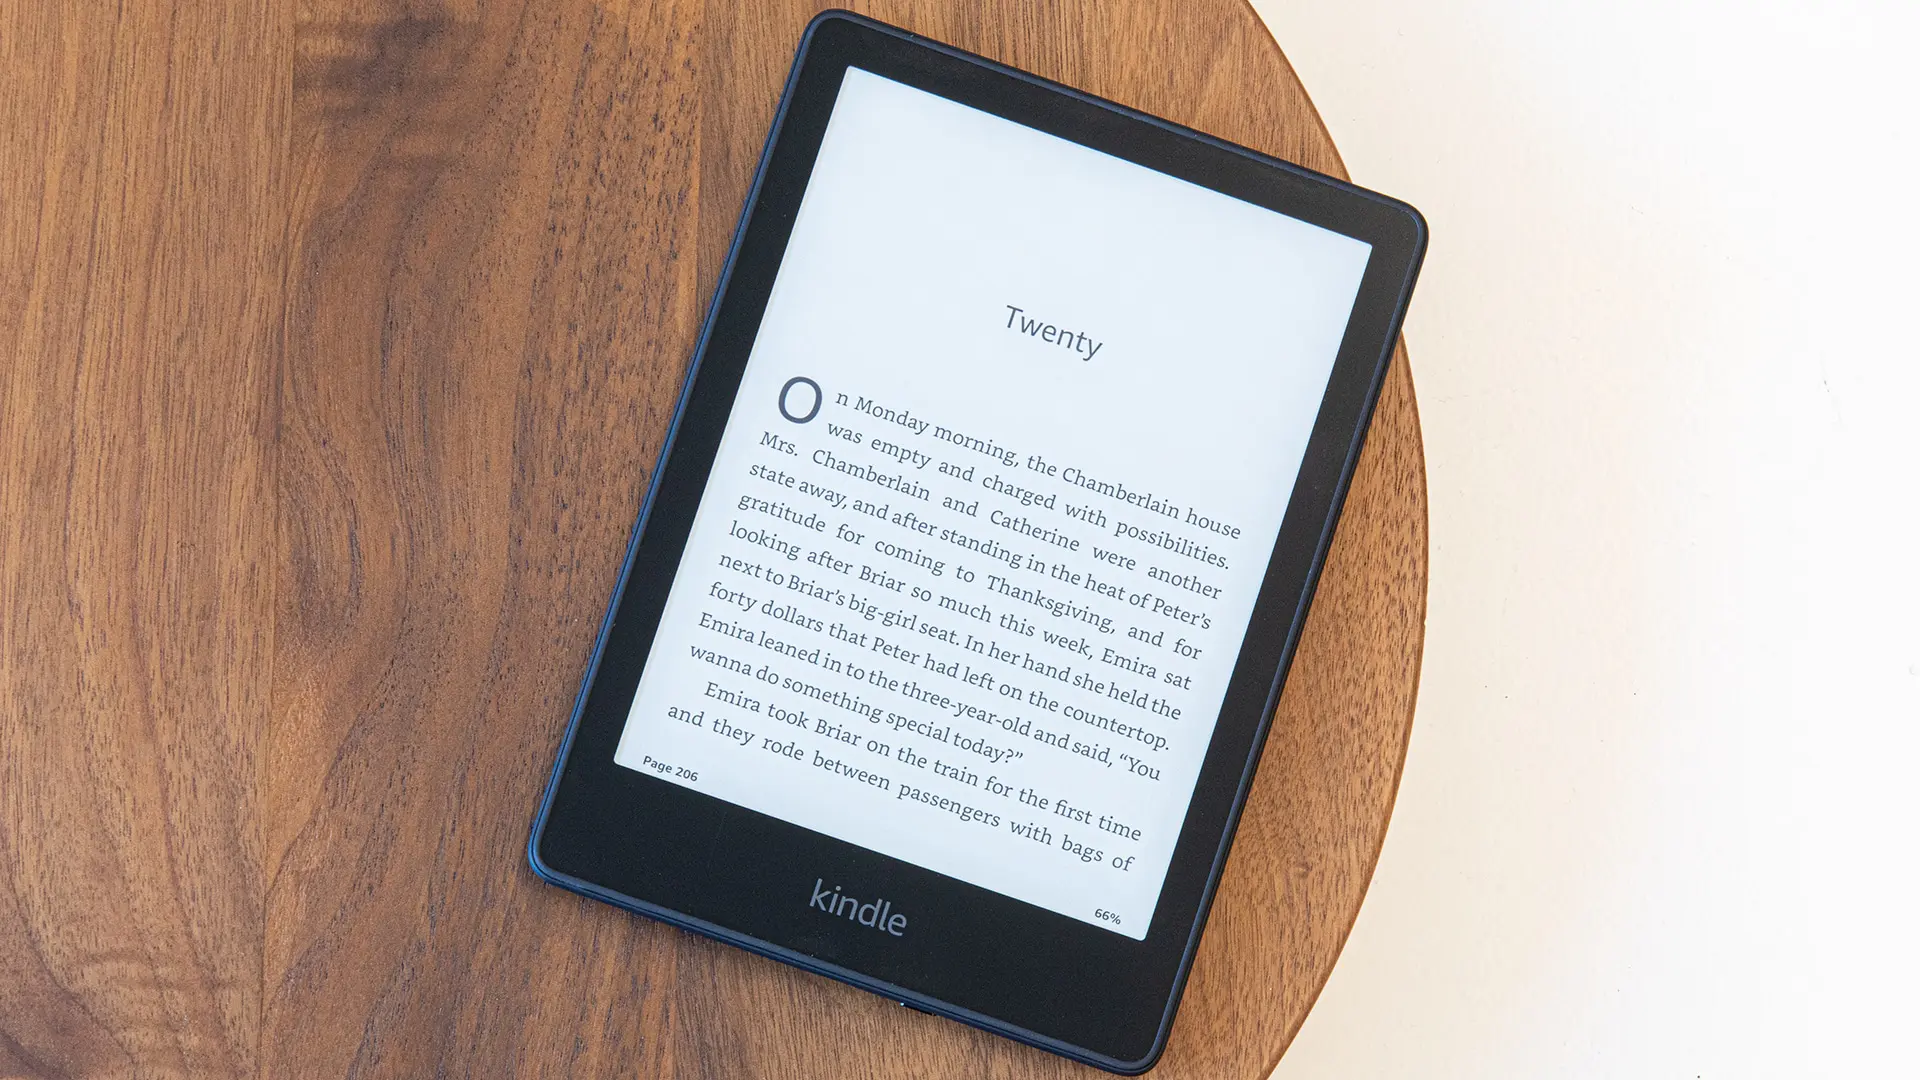 The Kindle Paperwhite 15 has a new page turn animation system